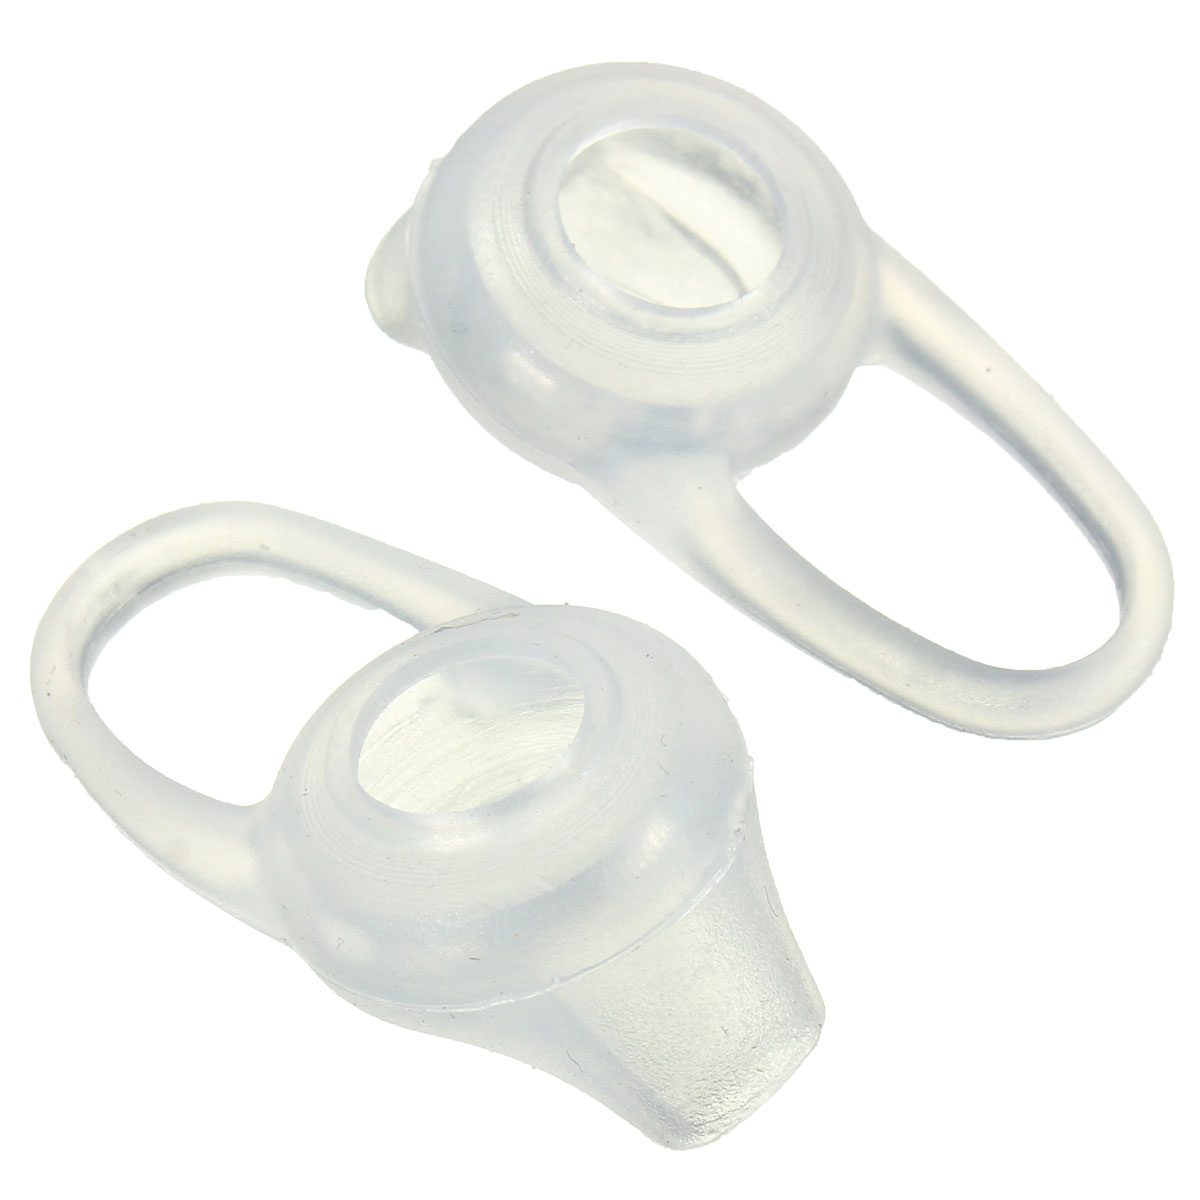 2pcs-Silicone-Earphone-Covers-Cap-Replacement-Earbud-Bud-Tips-Earbuds-Eartips-Earplug-Ear-Pads-1974853-4